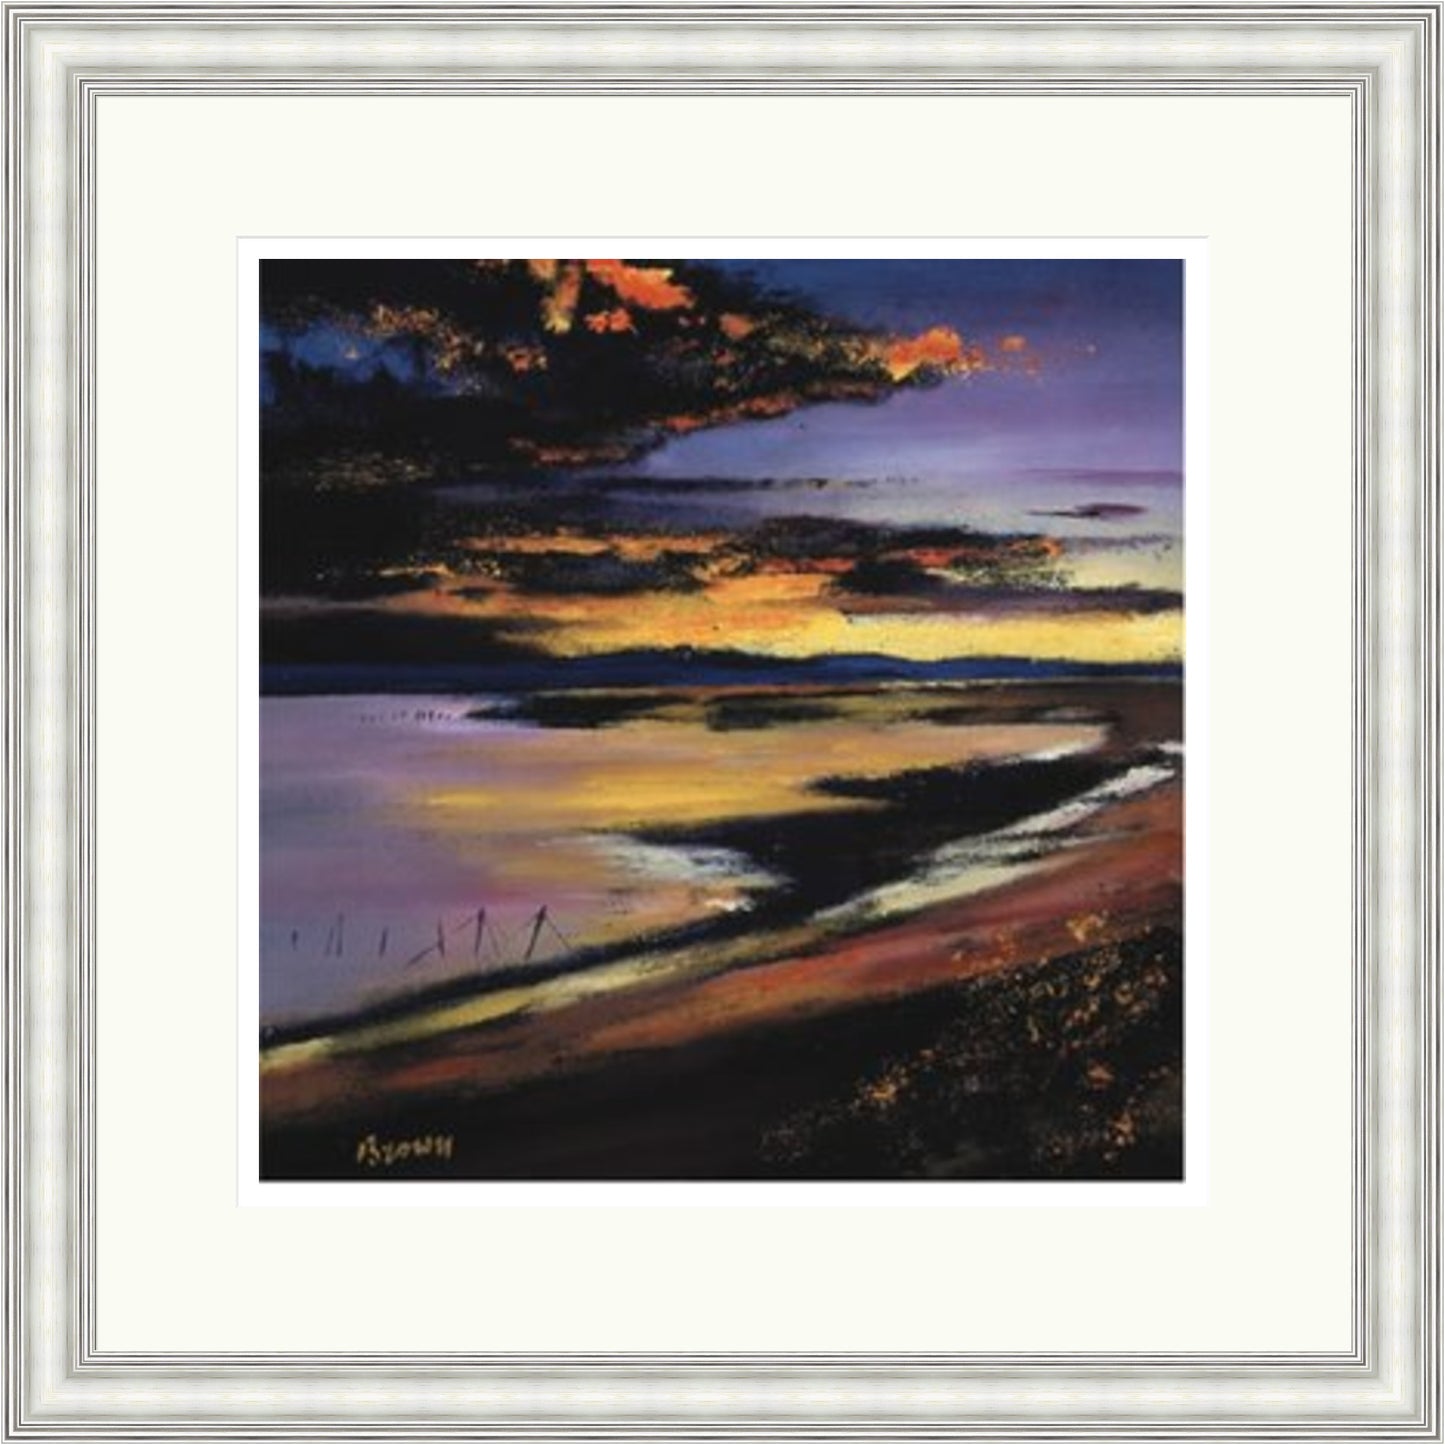 Last One - Cree Estuary Sunset (Signed Limited Edition) by Davy Brown